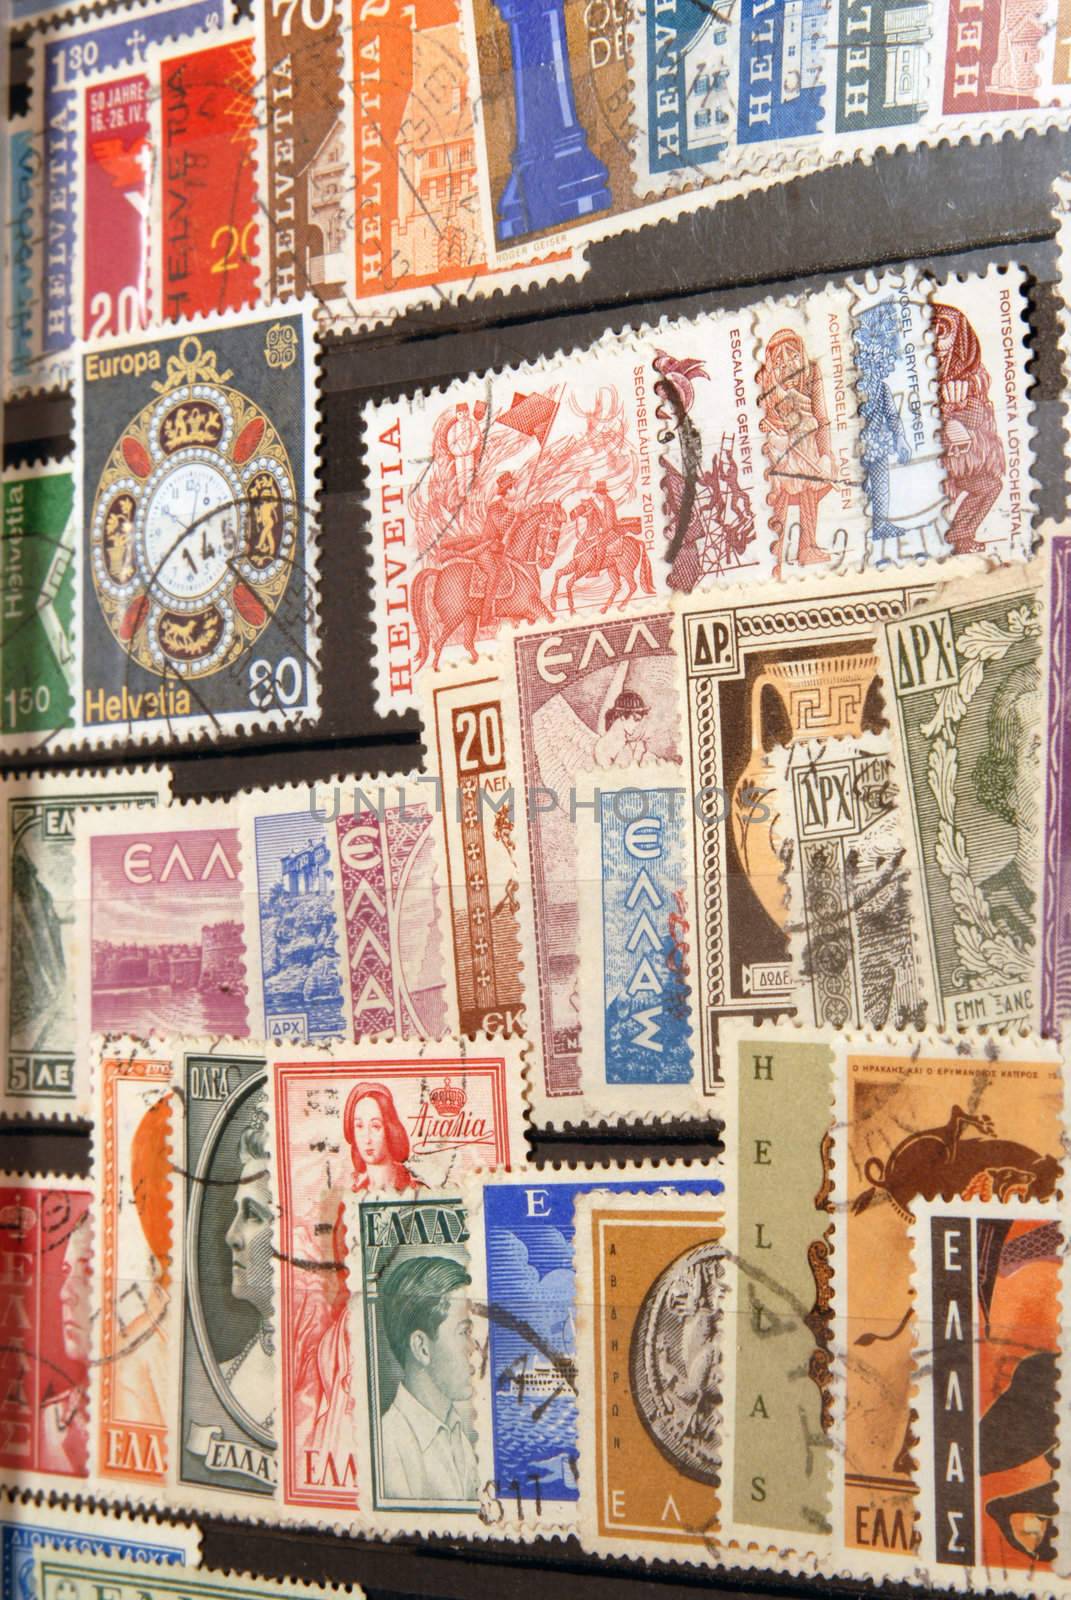 Diverse and colorful vintage postage stamps from Helvetia. Old collection.
